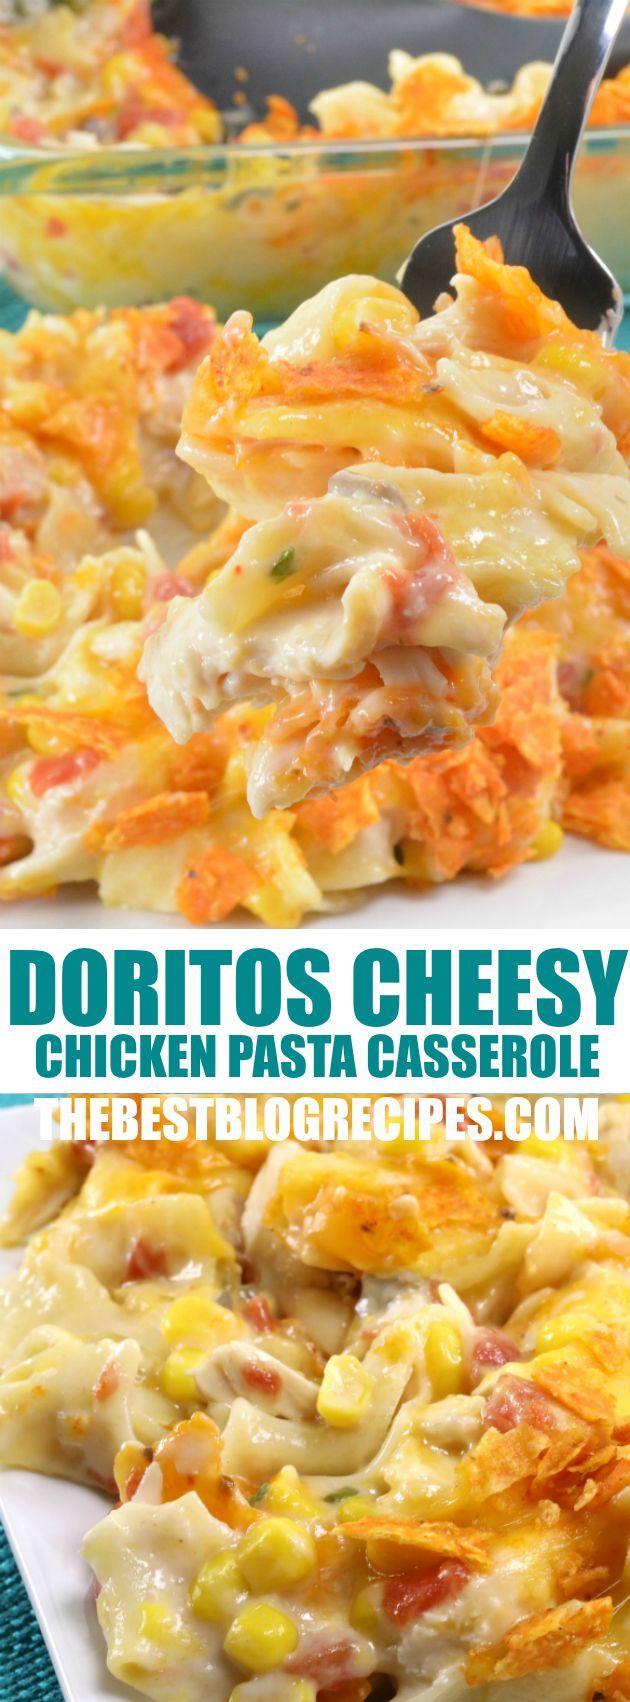 This Doritos Cheesy Chicken Pasta Casserole is an easy to make weeknight dinner that is perfect for busy families. It has just the right amount of noodles, chicken, cheesy deliciousness, and don’t forget the Doritos! -   23 cheesy chicken recipes
 ideas